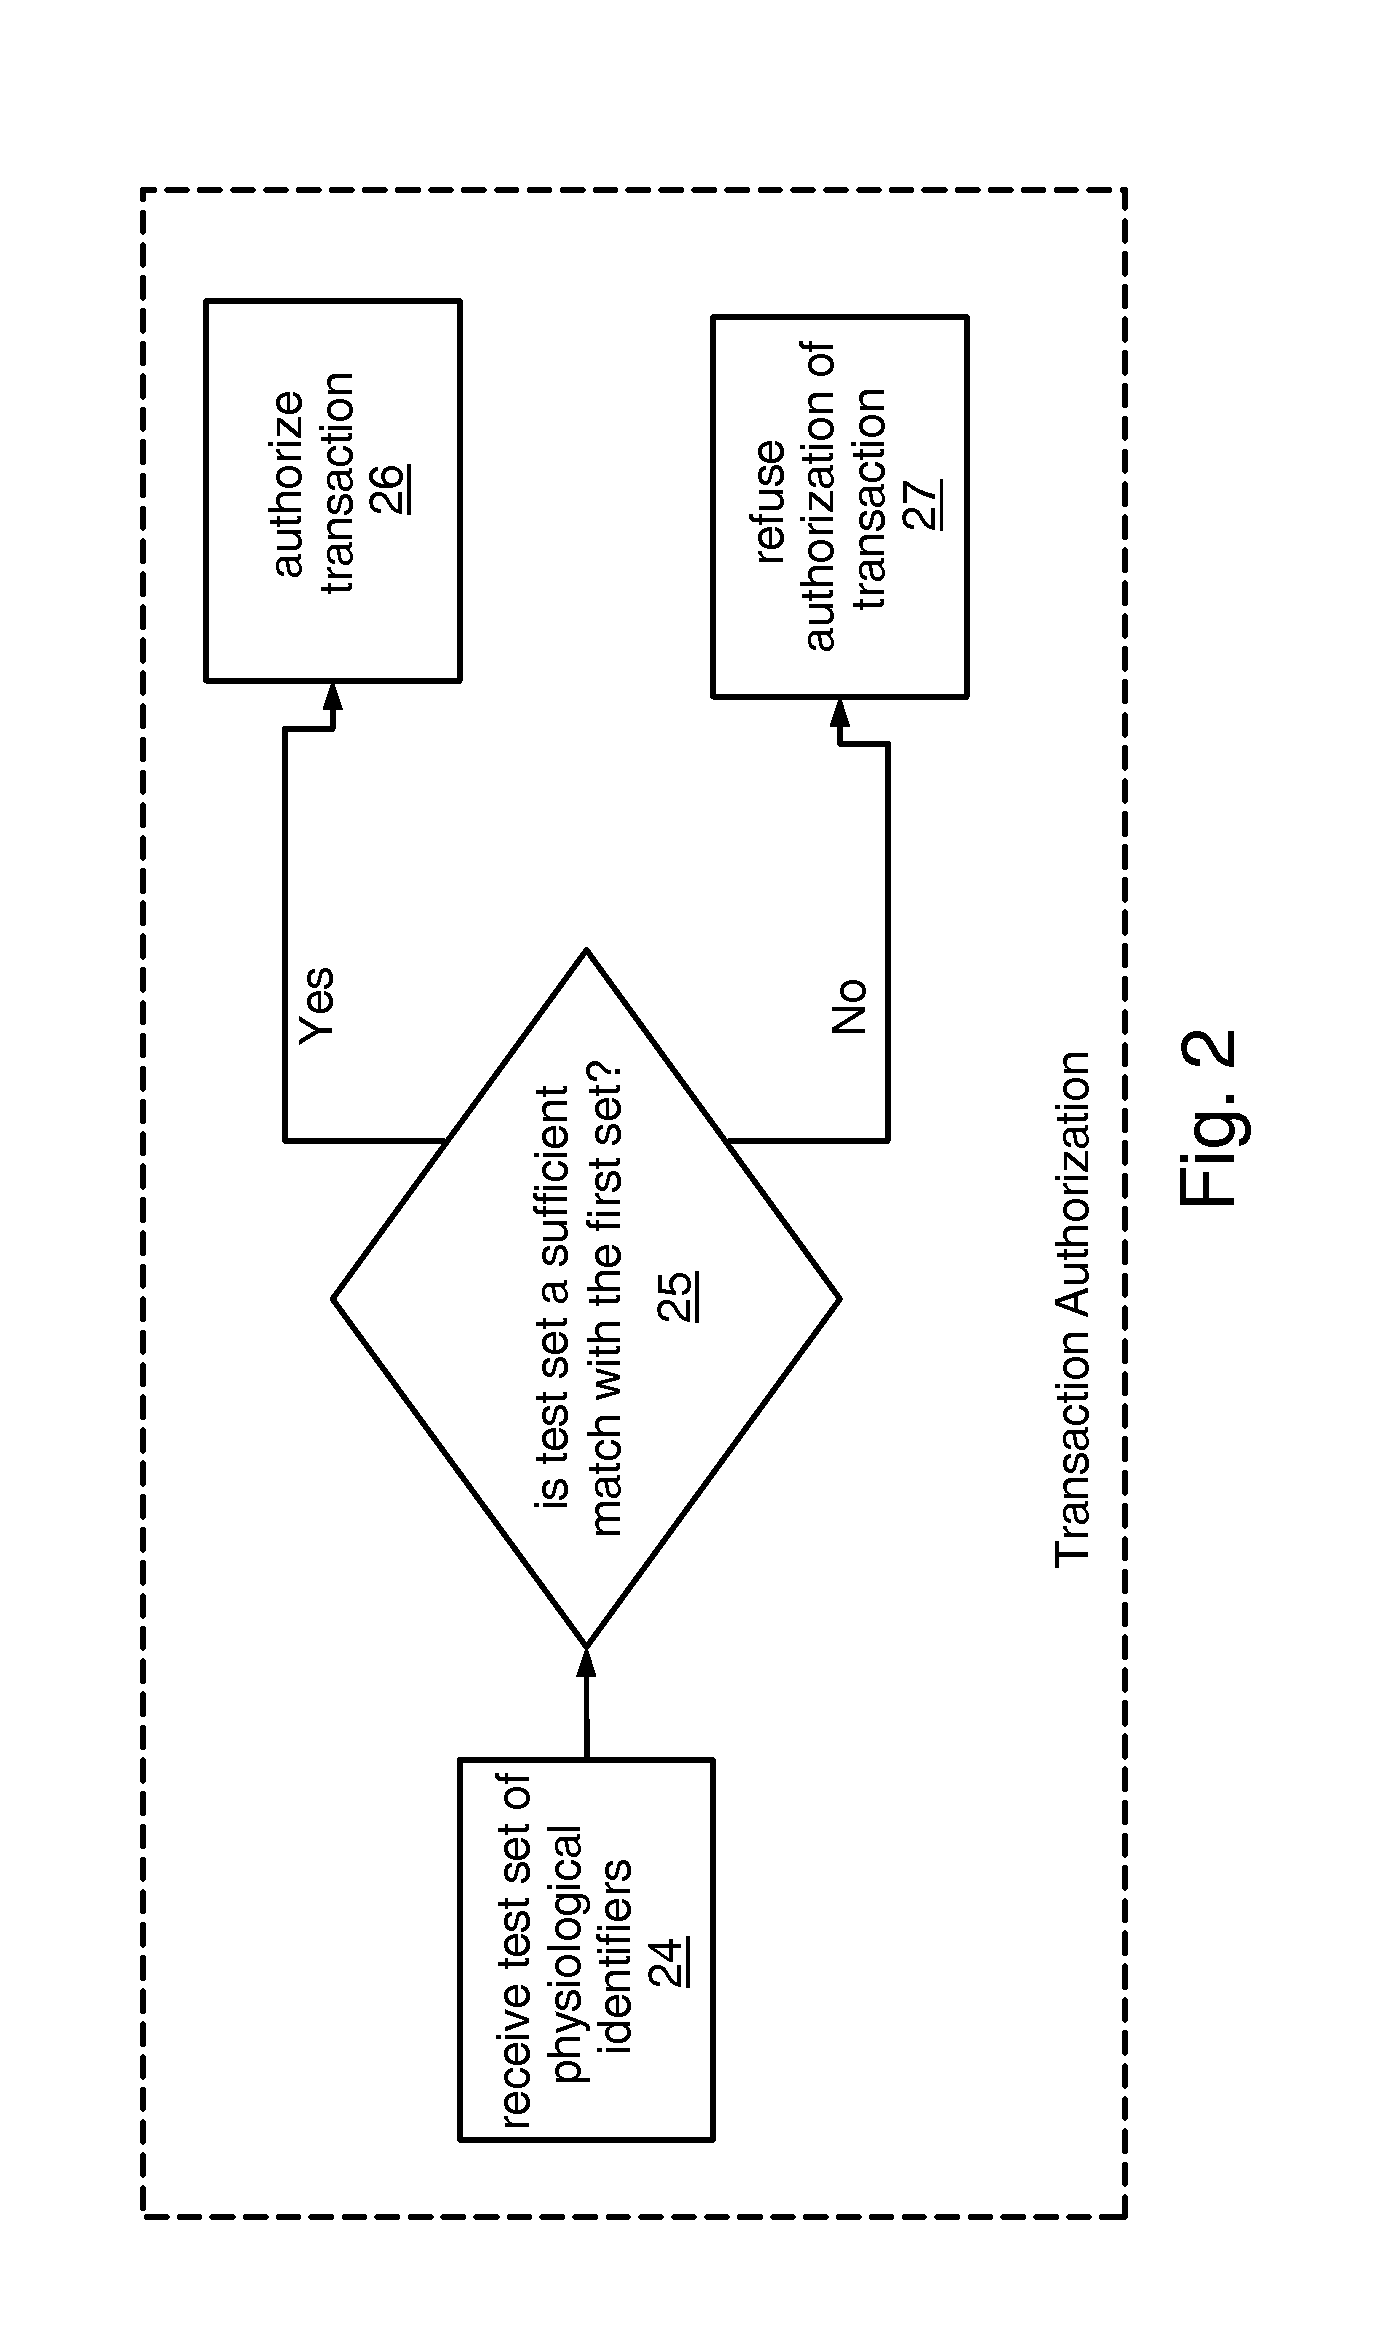 Apparatus and Method for Authenticated Multi-User Personal Information Database